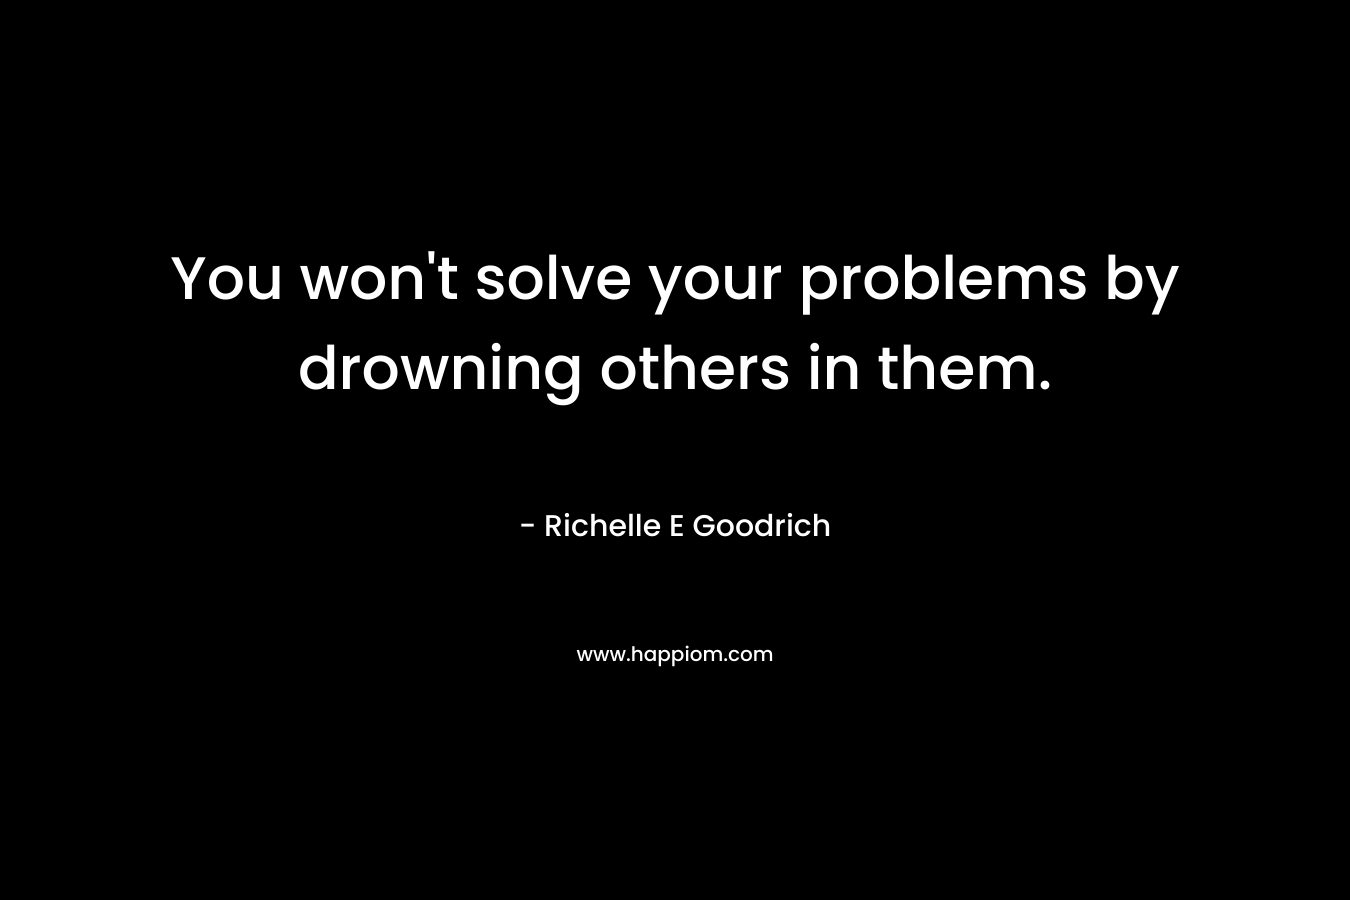 You won't solve your problems by drowning others in them.